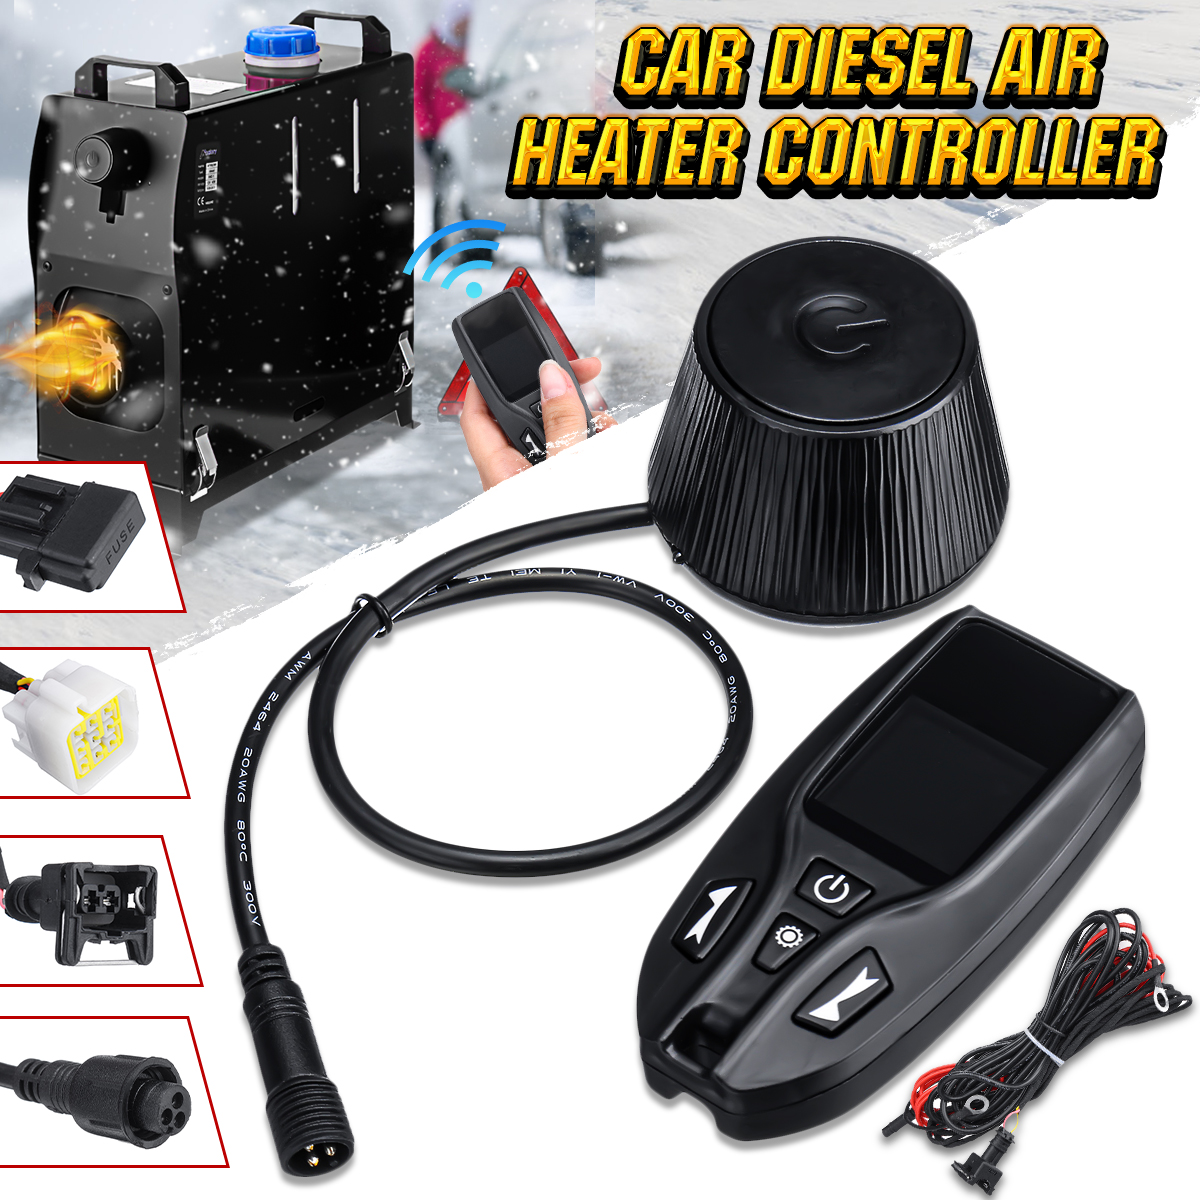 Air Heater Diesel Parking Remote Controller W/ LCD Monitor Switch Board 12V USPS 